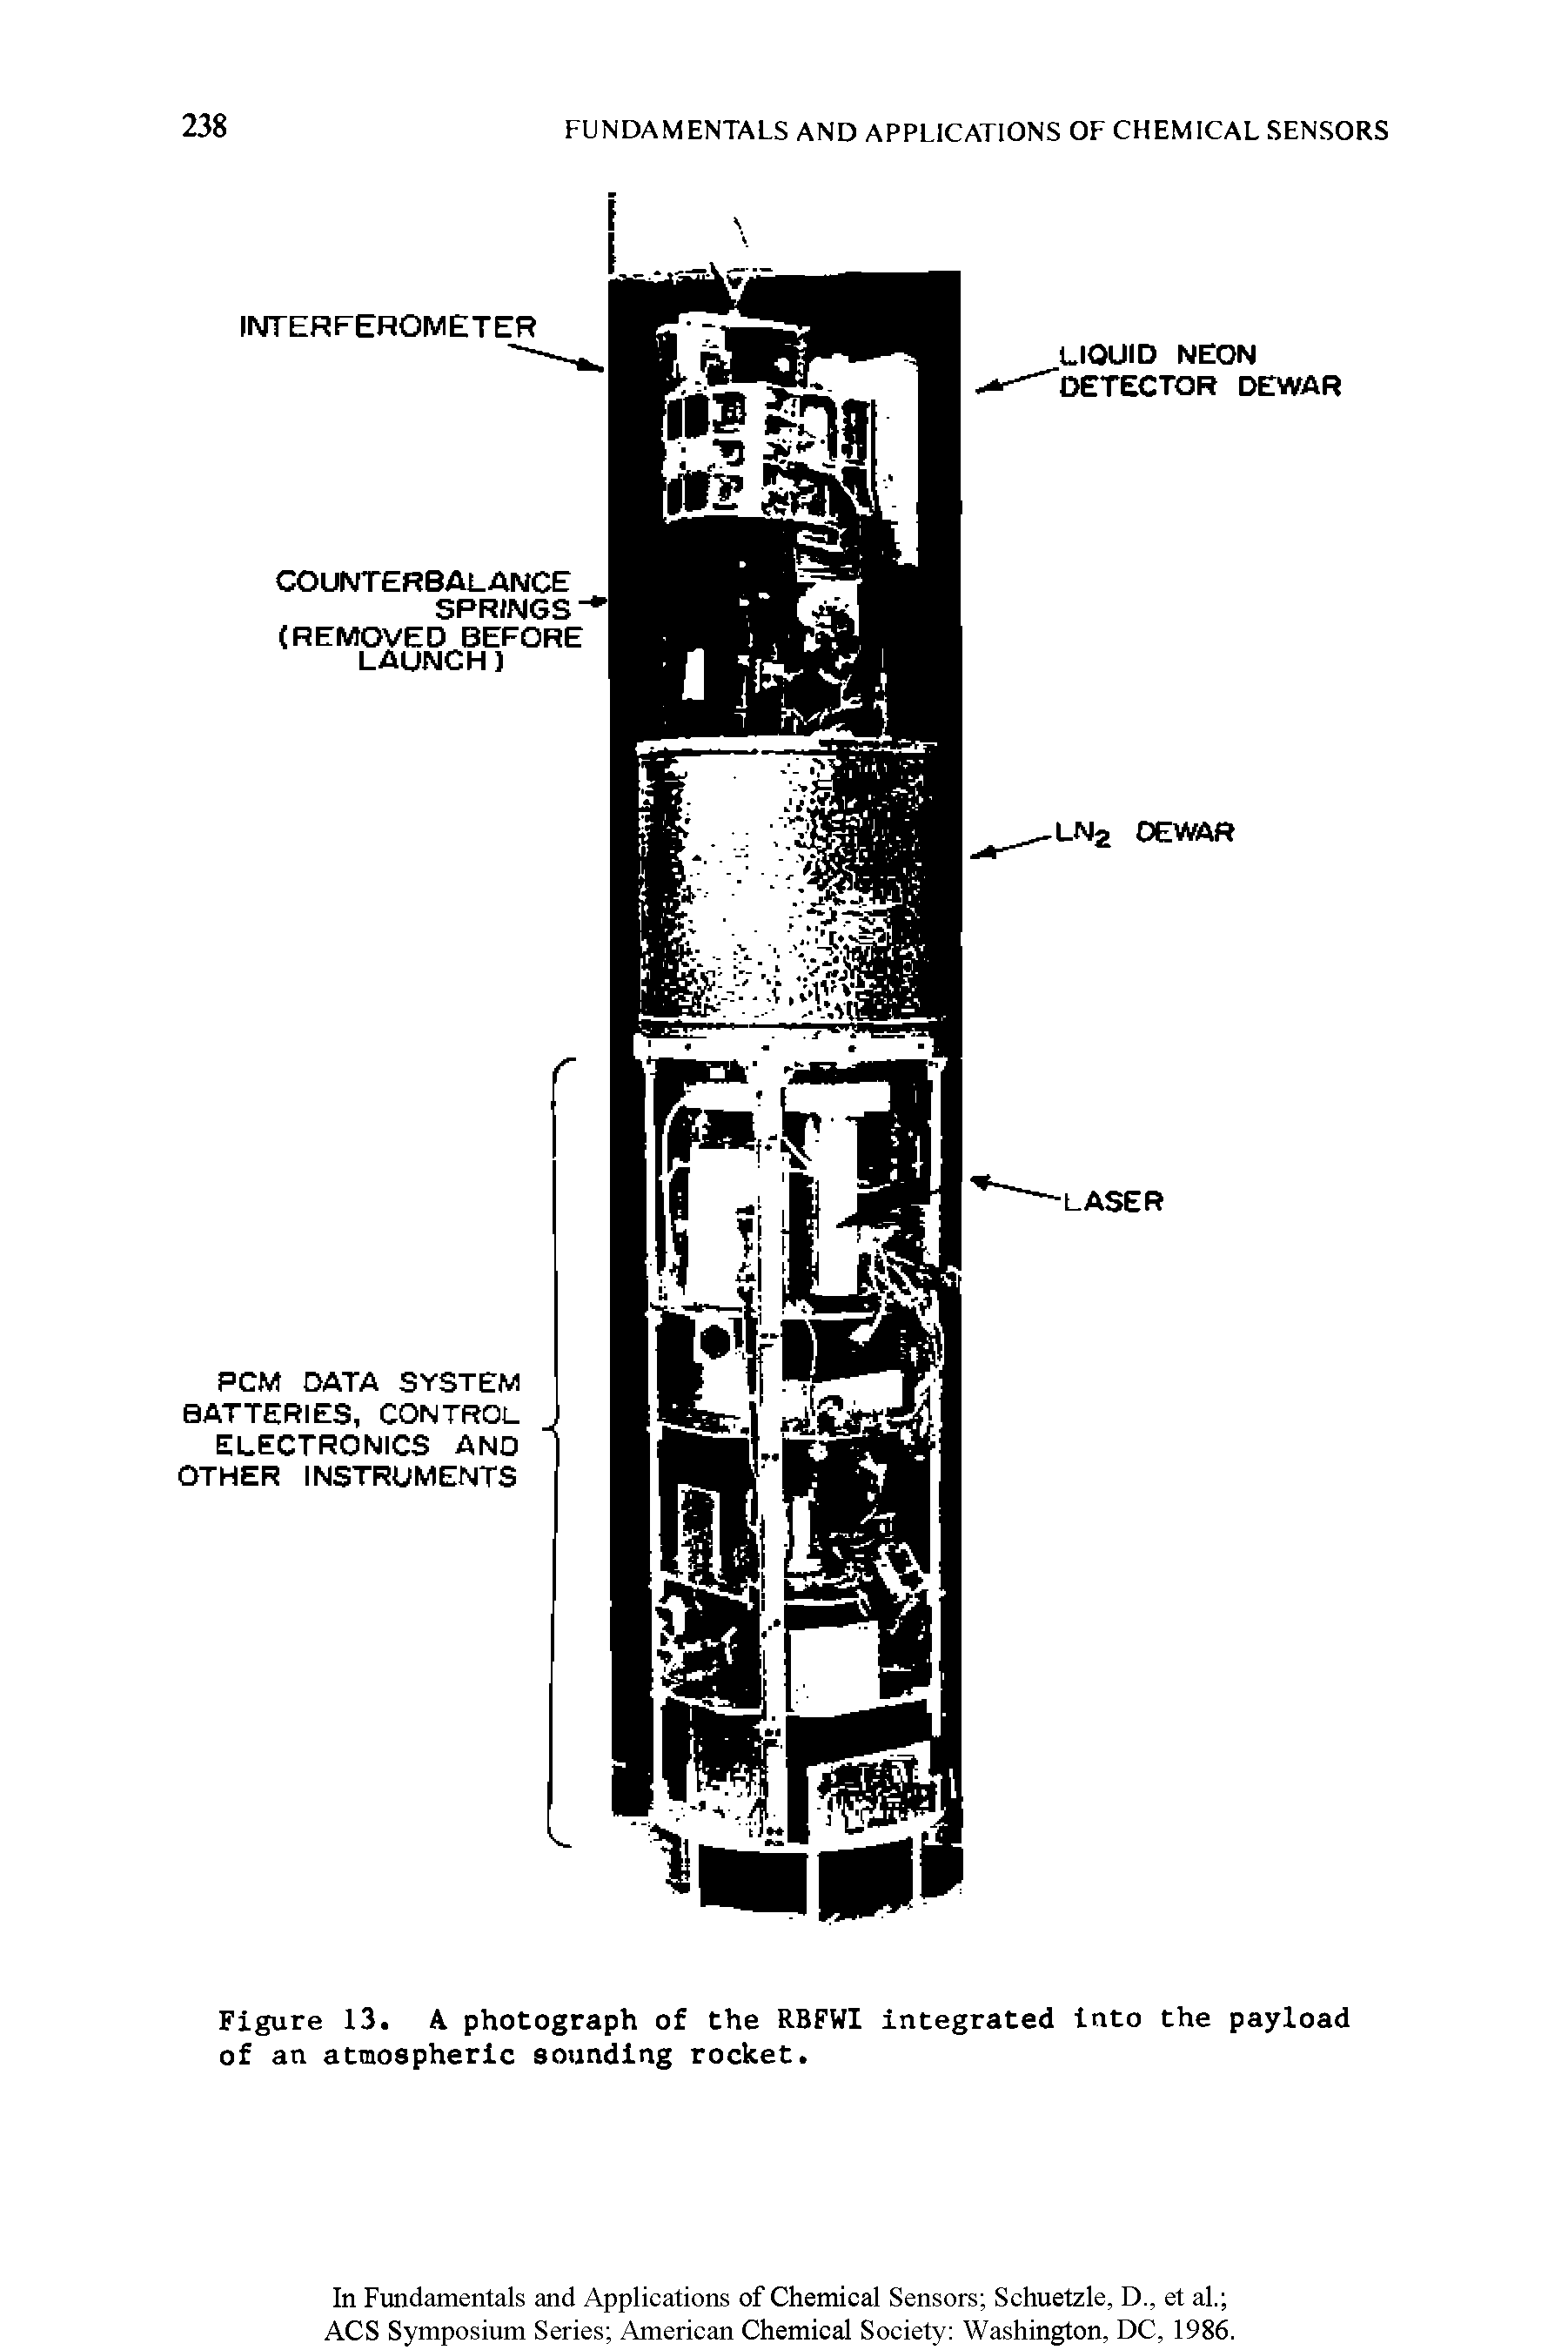 Figure 13. A photograph of the RBFWI integrated into the payload of an atmospheric sounding rocket.